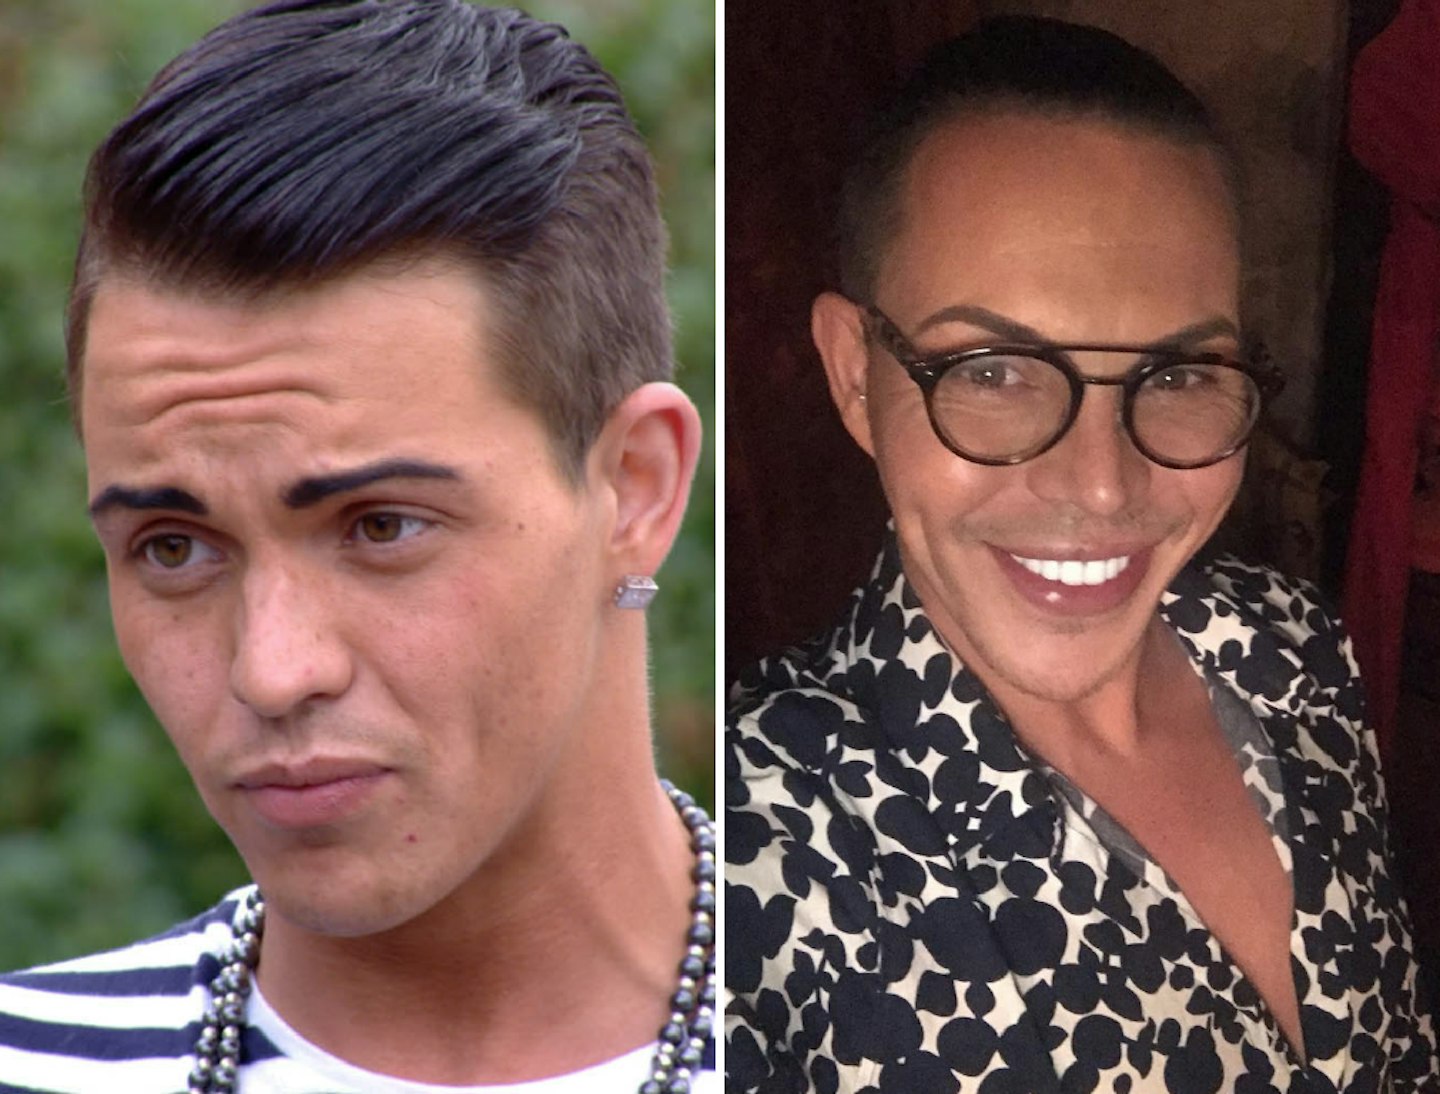 Bobby Norris before and after plastic surgery